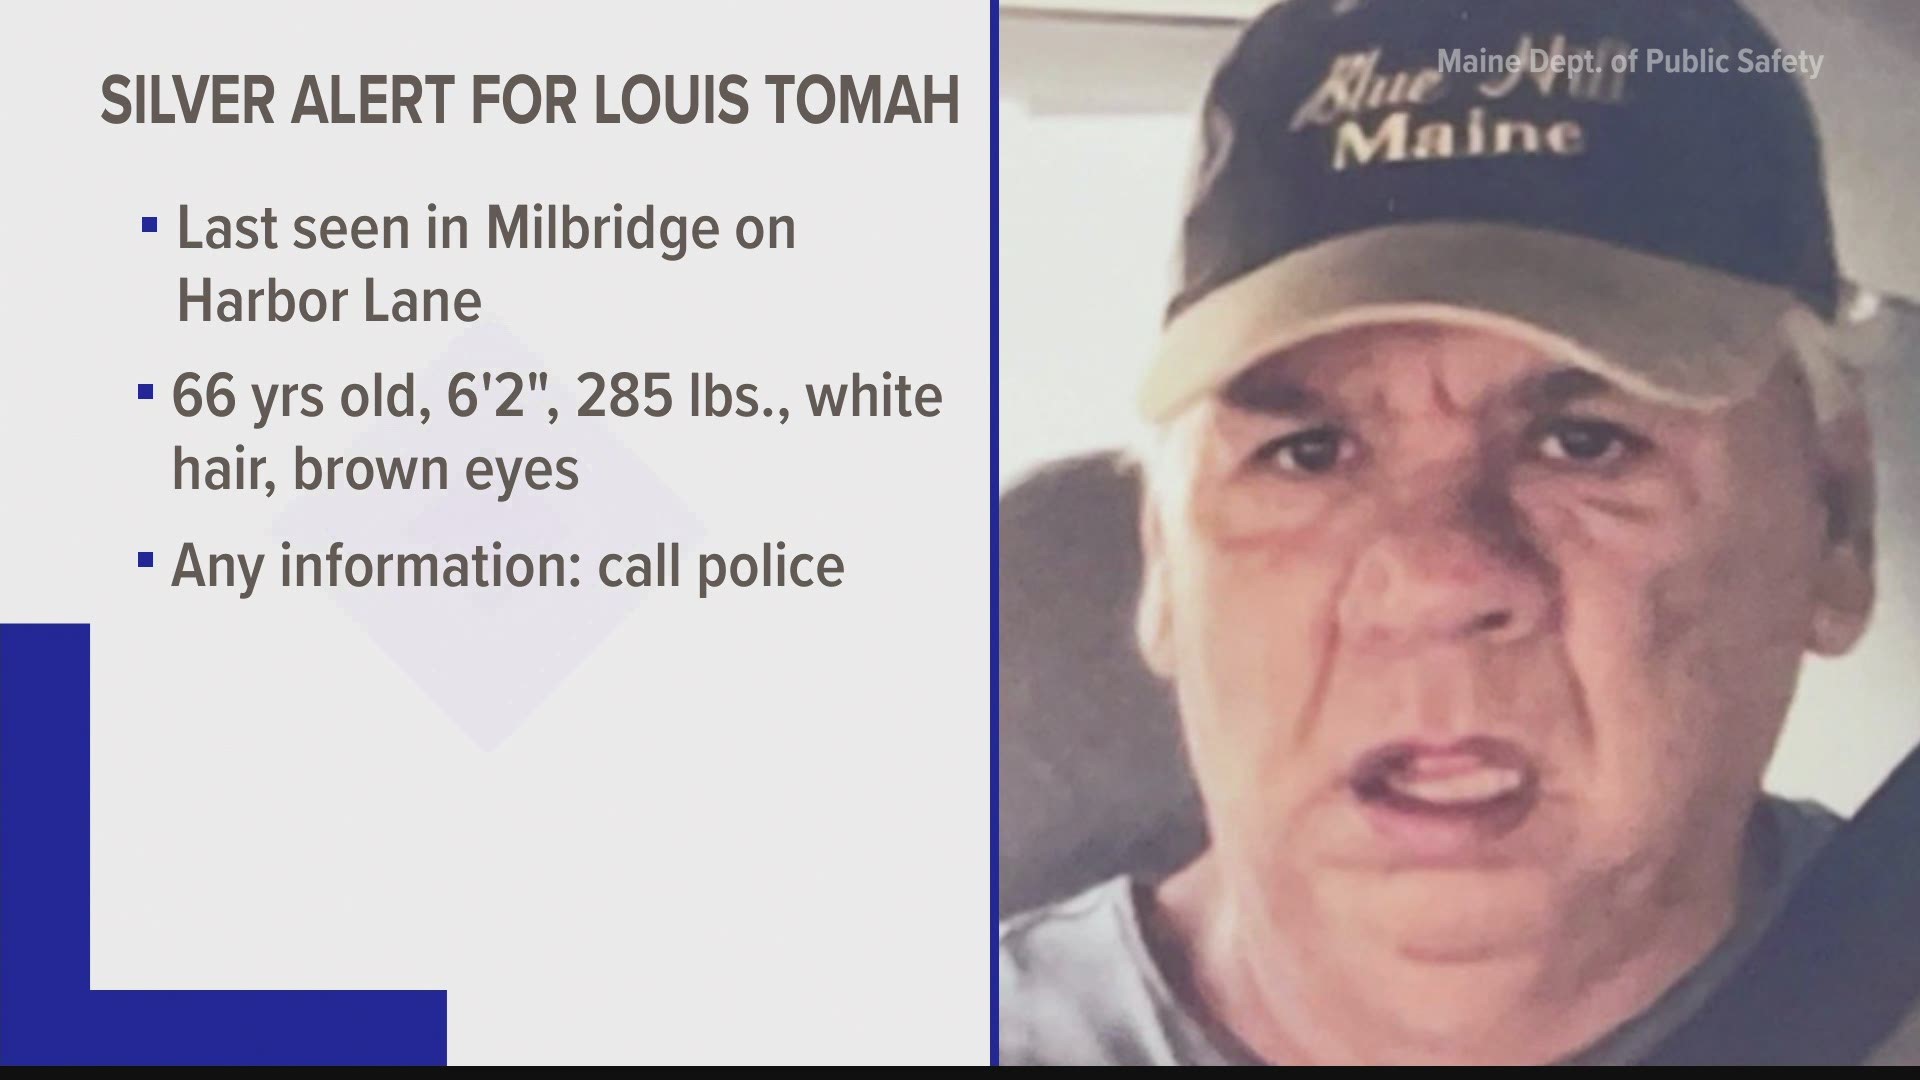 State Police have issued a silver alert for Louis Tomah, 66